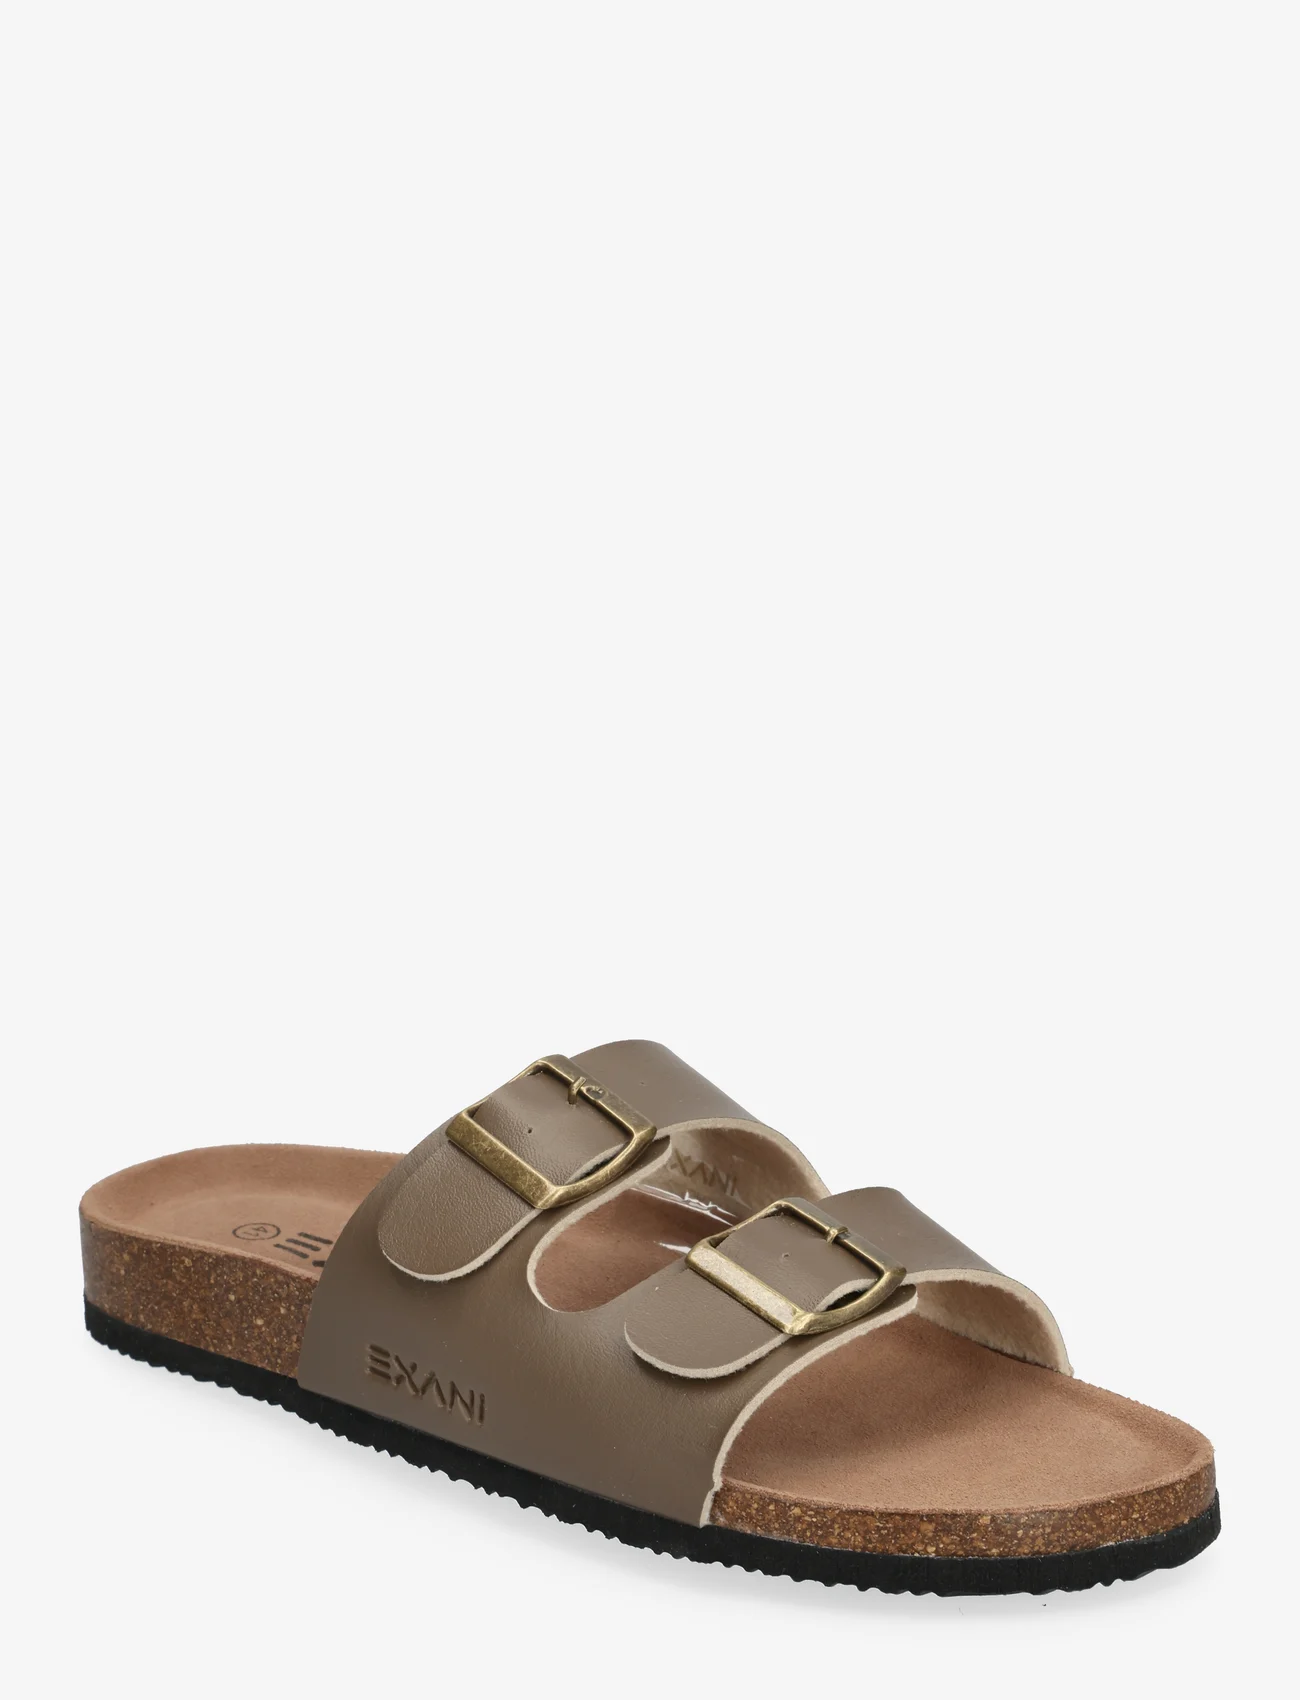 Exani - SPECTRA M - sandals - brown - 0